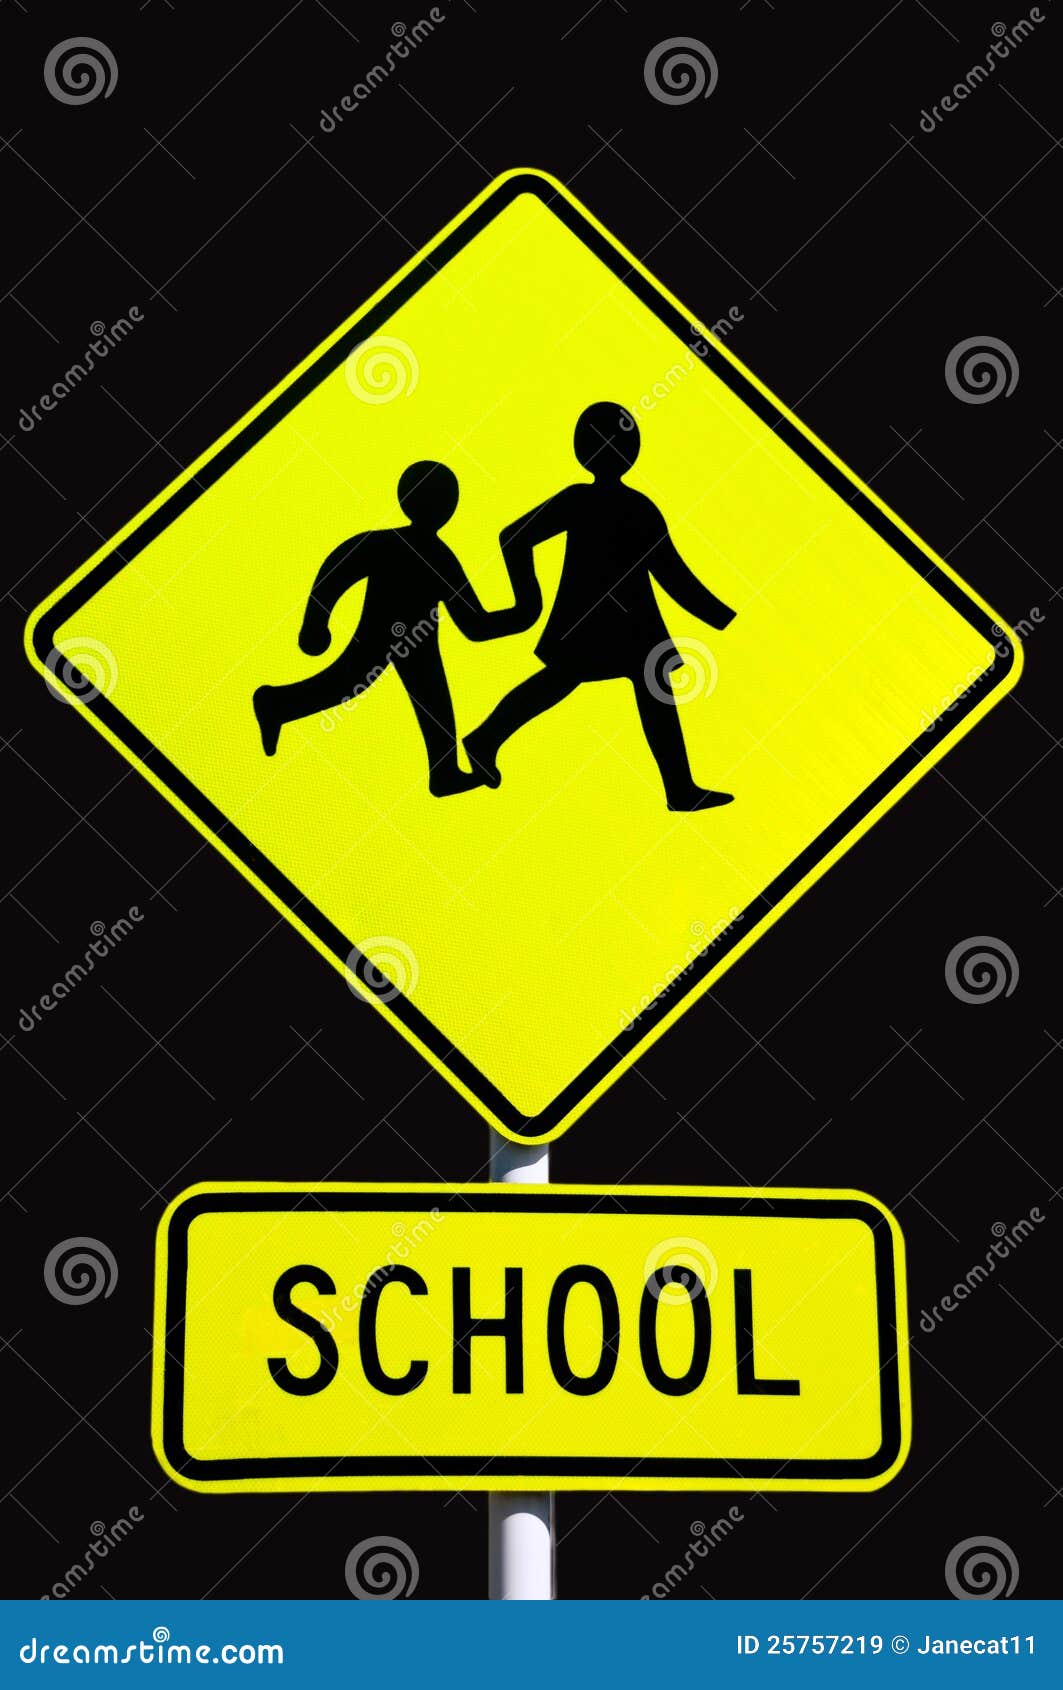 School Traffic Sign Royalty Free Stock Images - Image: 25757219